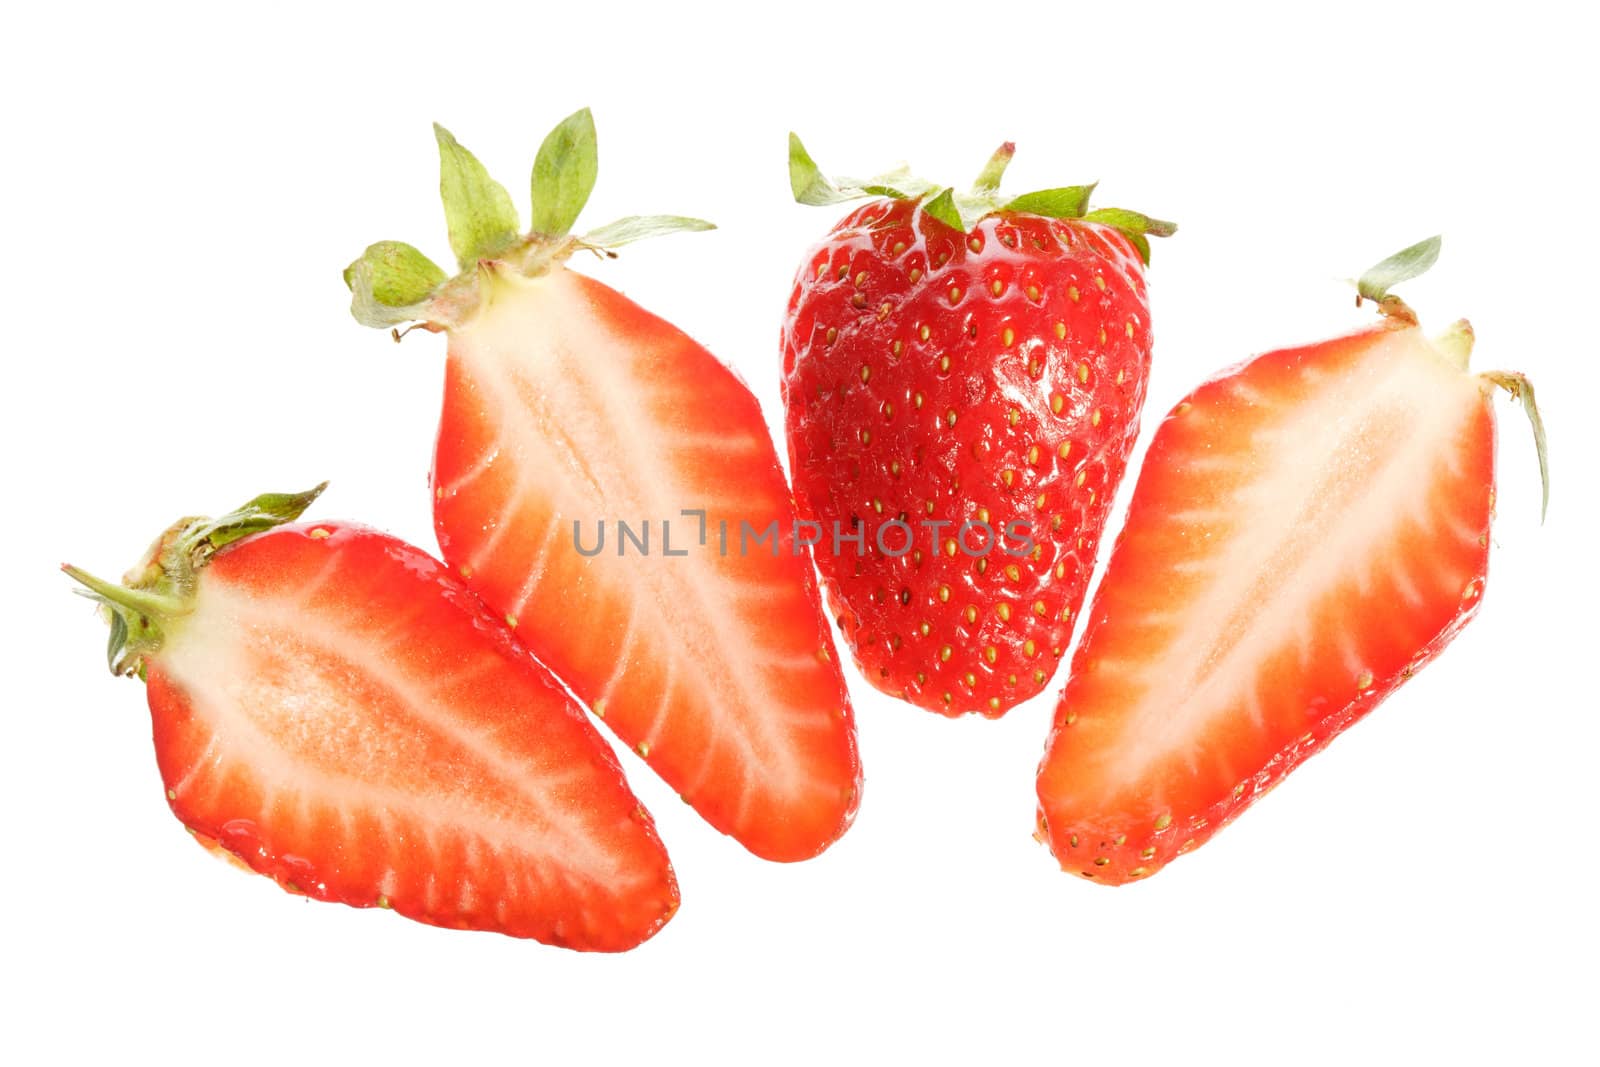 Ripe strawberry slices by ecobo